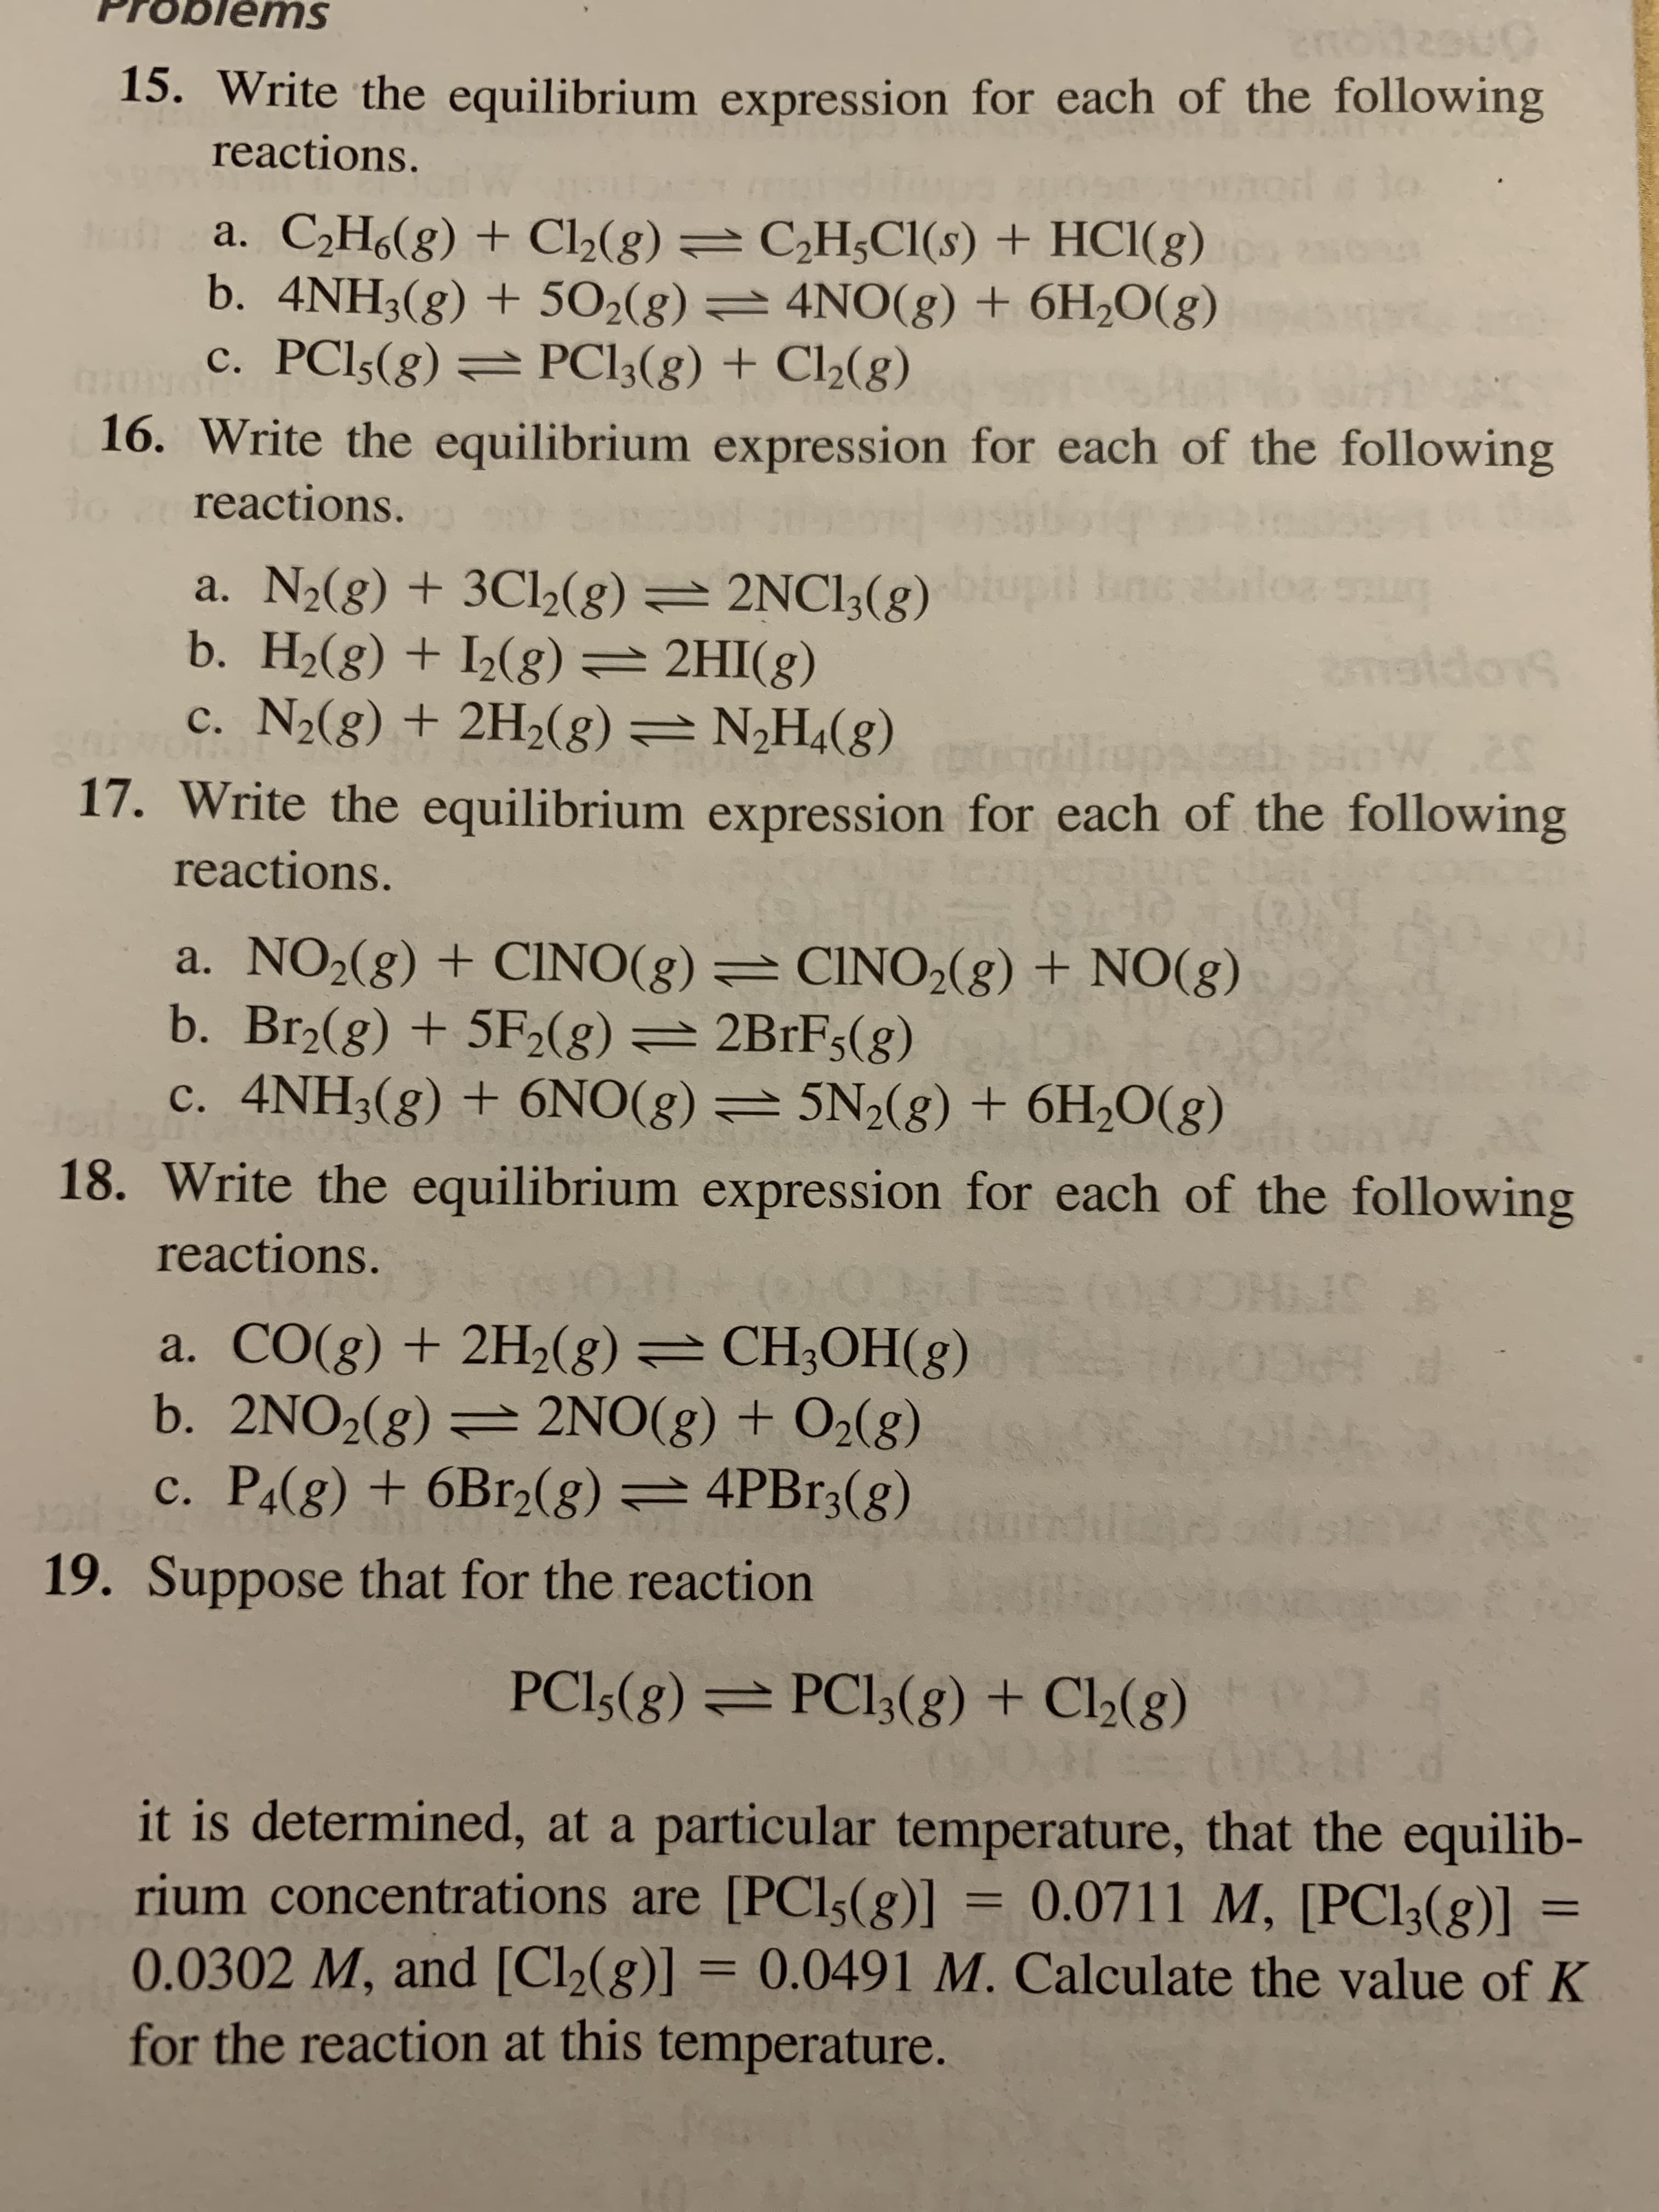 Write the equilibrium expression for each of the following
reactions.
a. NO2(g) + CINO(g) = CINO2(g) + NO(g)
b. Br2(g) + 5F2(g)= 2B1F5(g)
c. 4NH3(g) + 6NO(g)= 5N2(g) + 6H2O(g)
